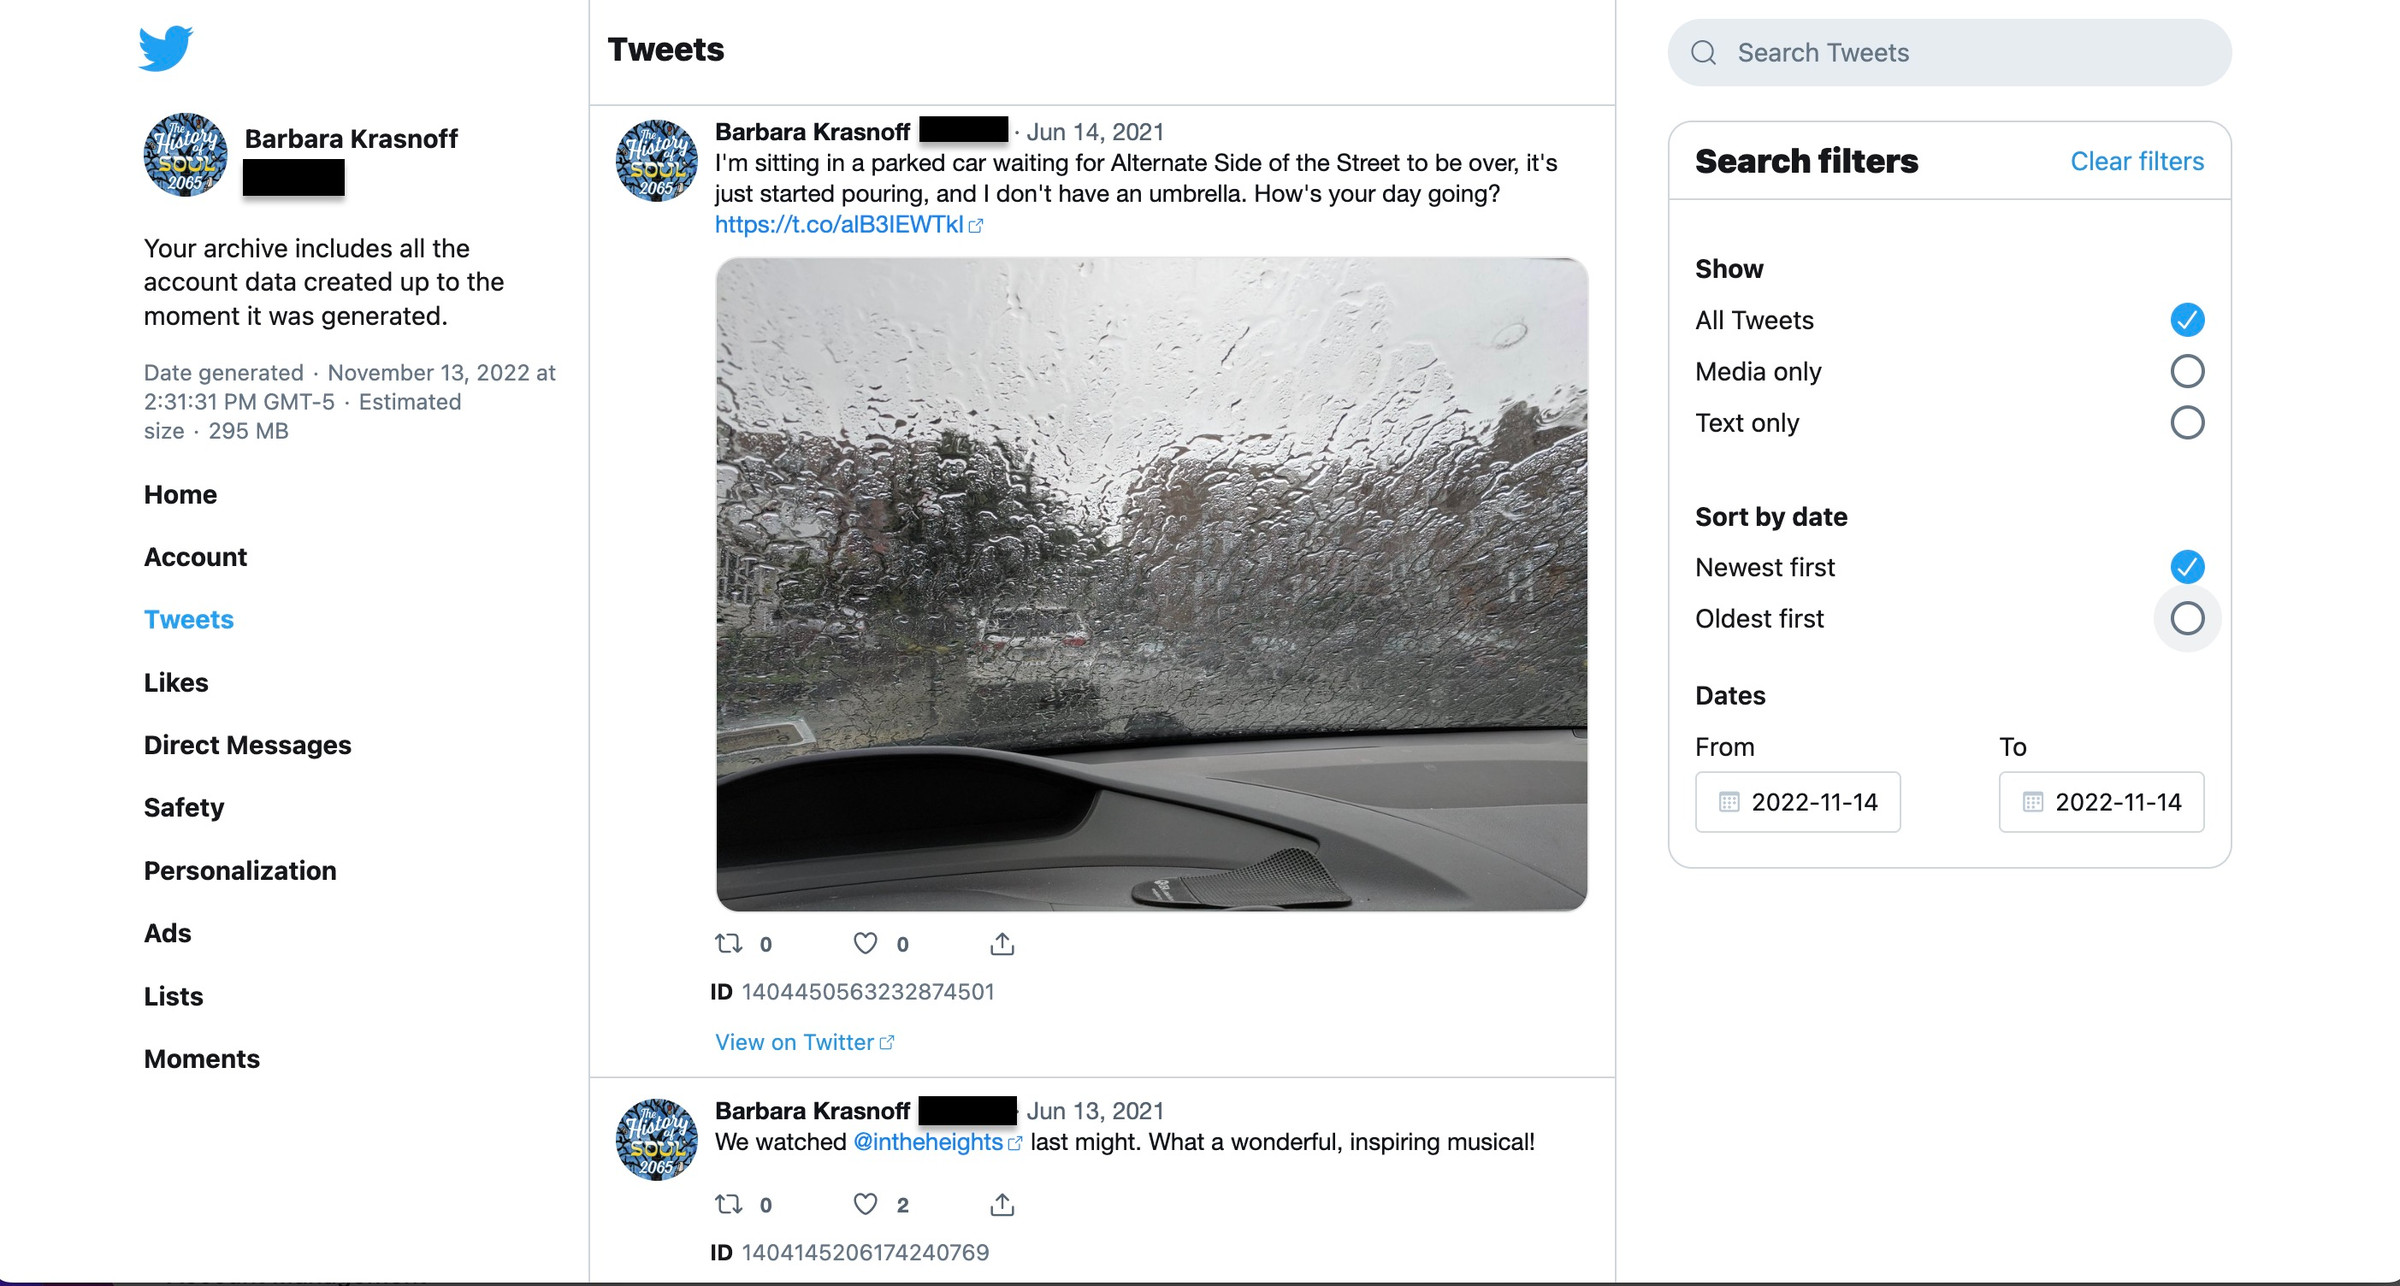 Web page showing various aspects of twitter content on the left, a tweet with a picture of a wet windshield in the middle, and search filters on the right.